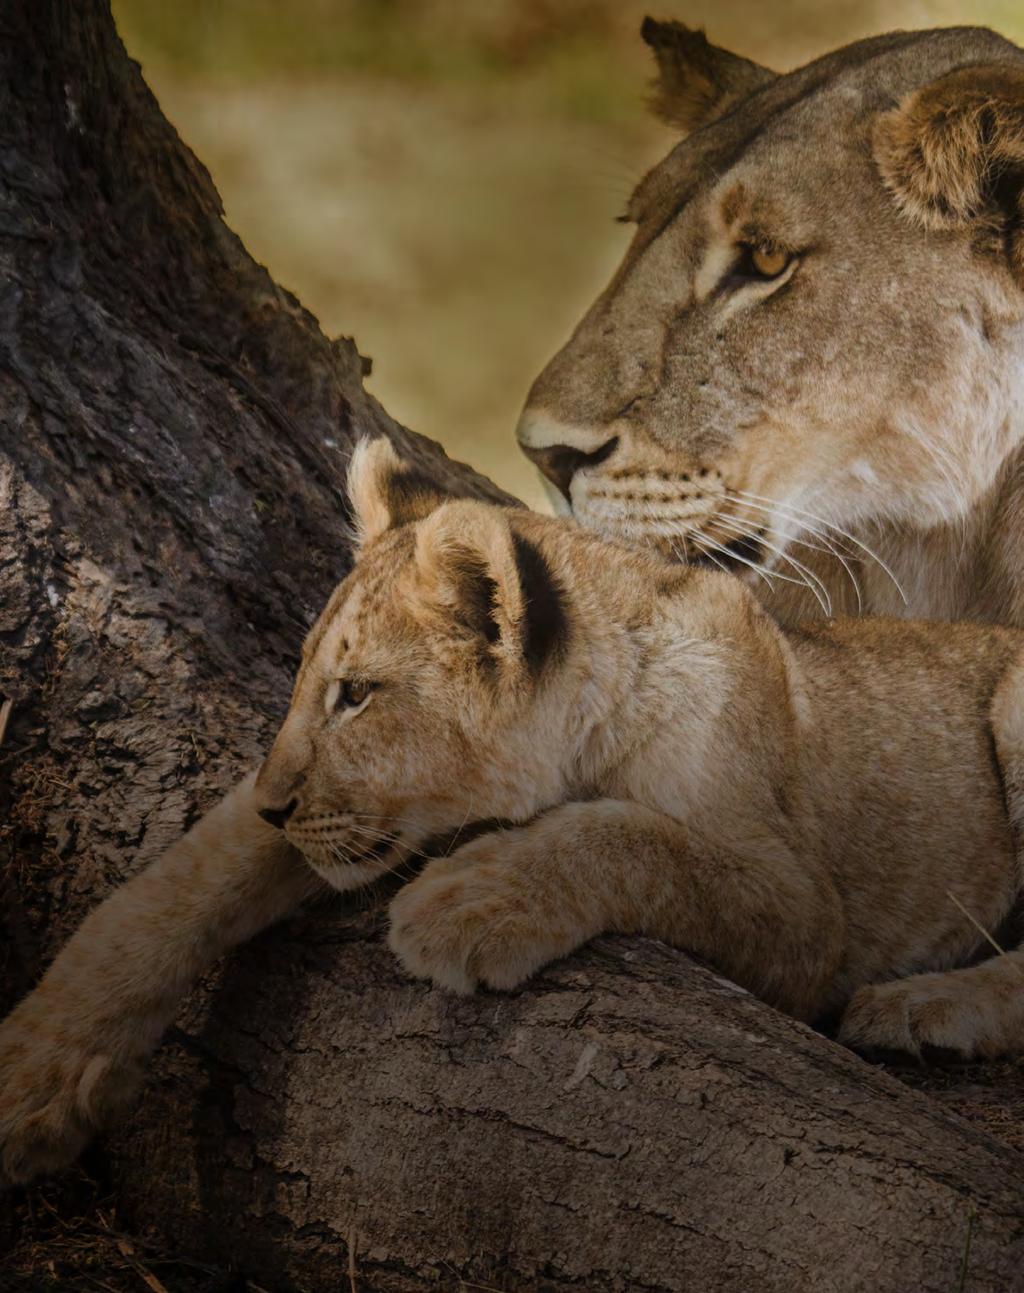 CONSERVATION & CULTURAL INITIATIVES RUAHA CARNIVORE PROJECT Carnivore Research project Ruaha National Park, Tanzania Eric Frank/Kwihala Camp/Asilia Africa $ 90 in proceeds from your safari go to the